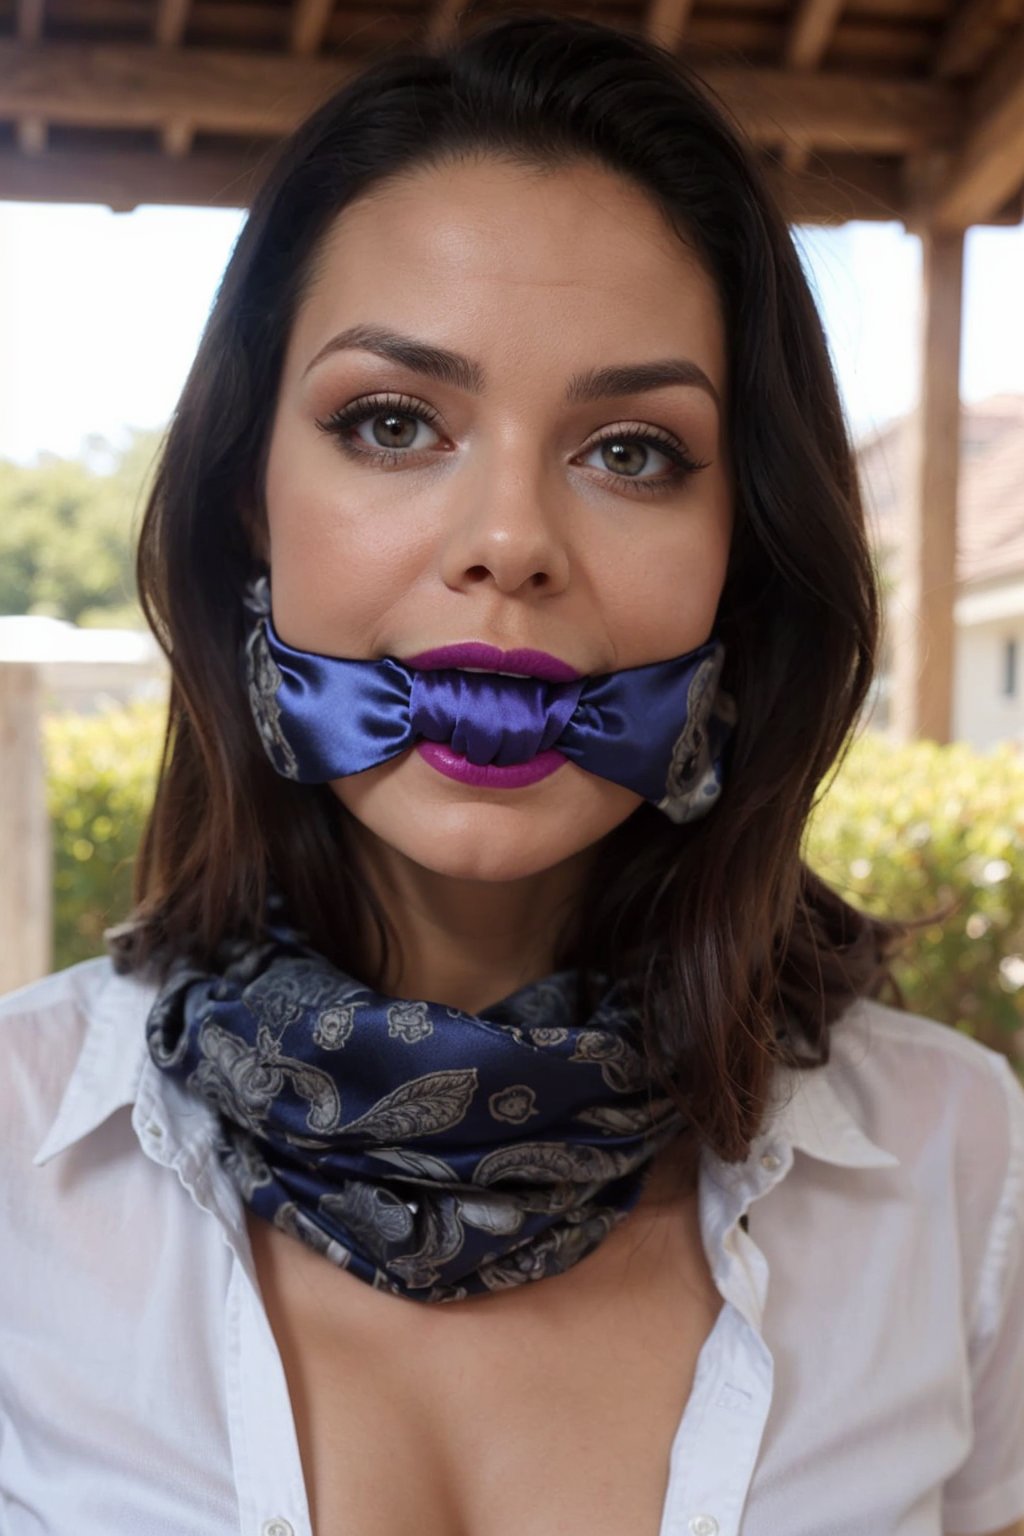 photograph,  View of 25 years old caucasian female, sunny, large gag of patterned satin, detailed lips, wearing white shirt, brokeh, ,scarfgag